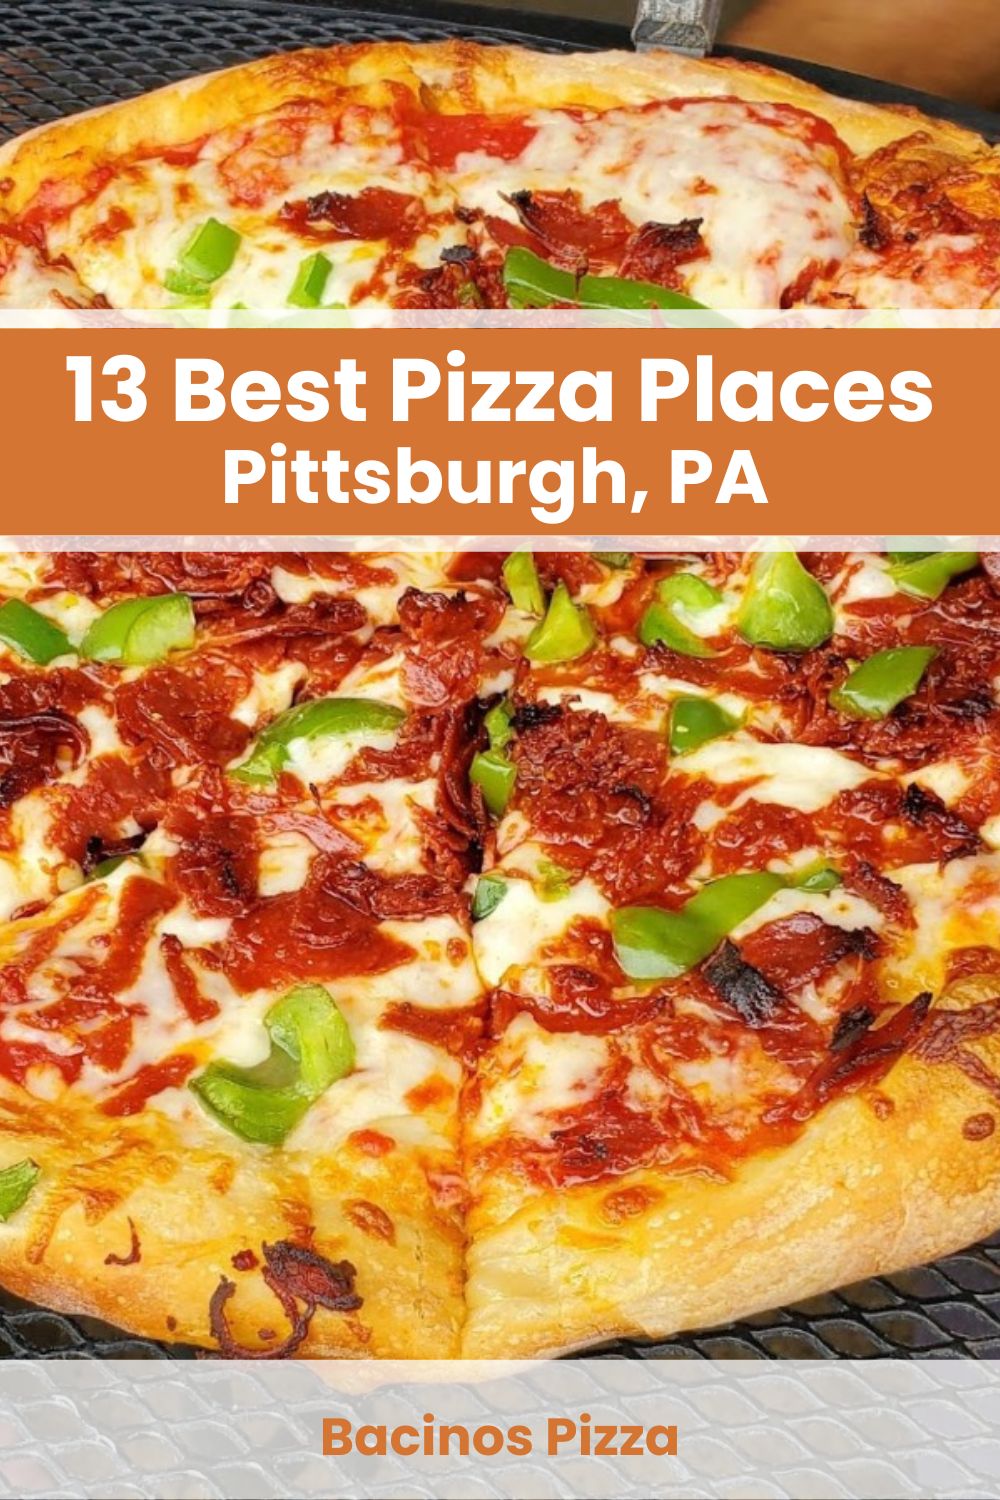 Best Pizza Places in Pittsburgh